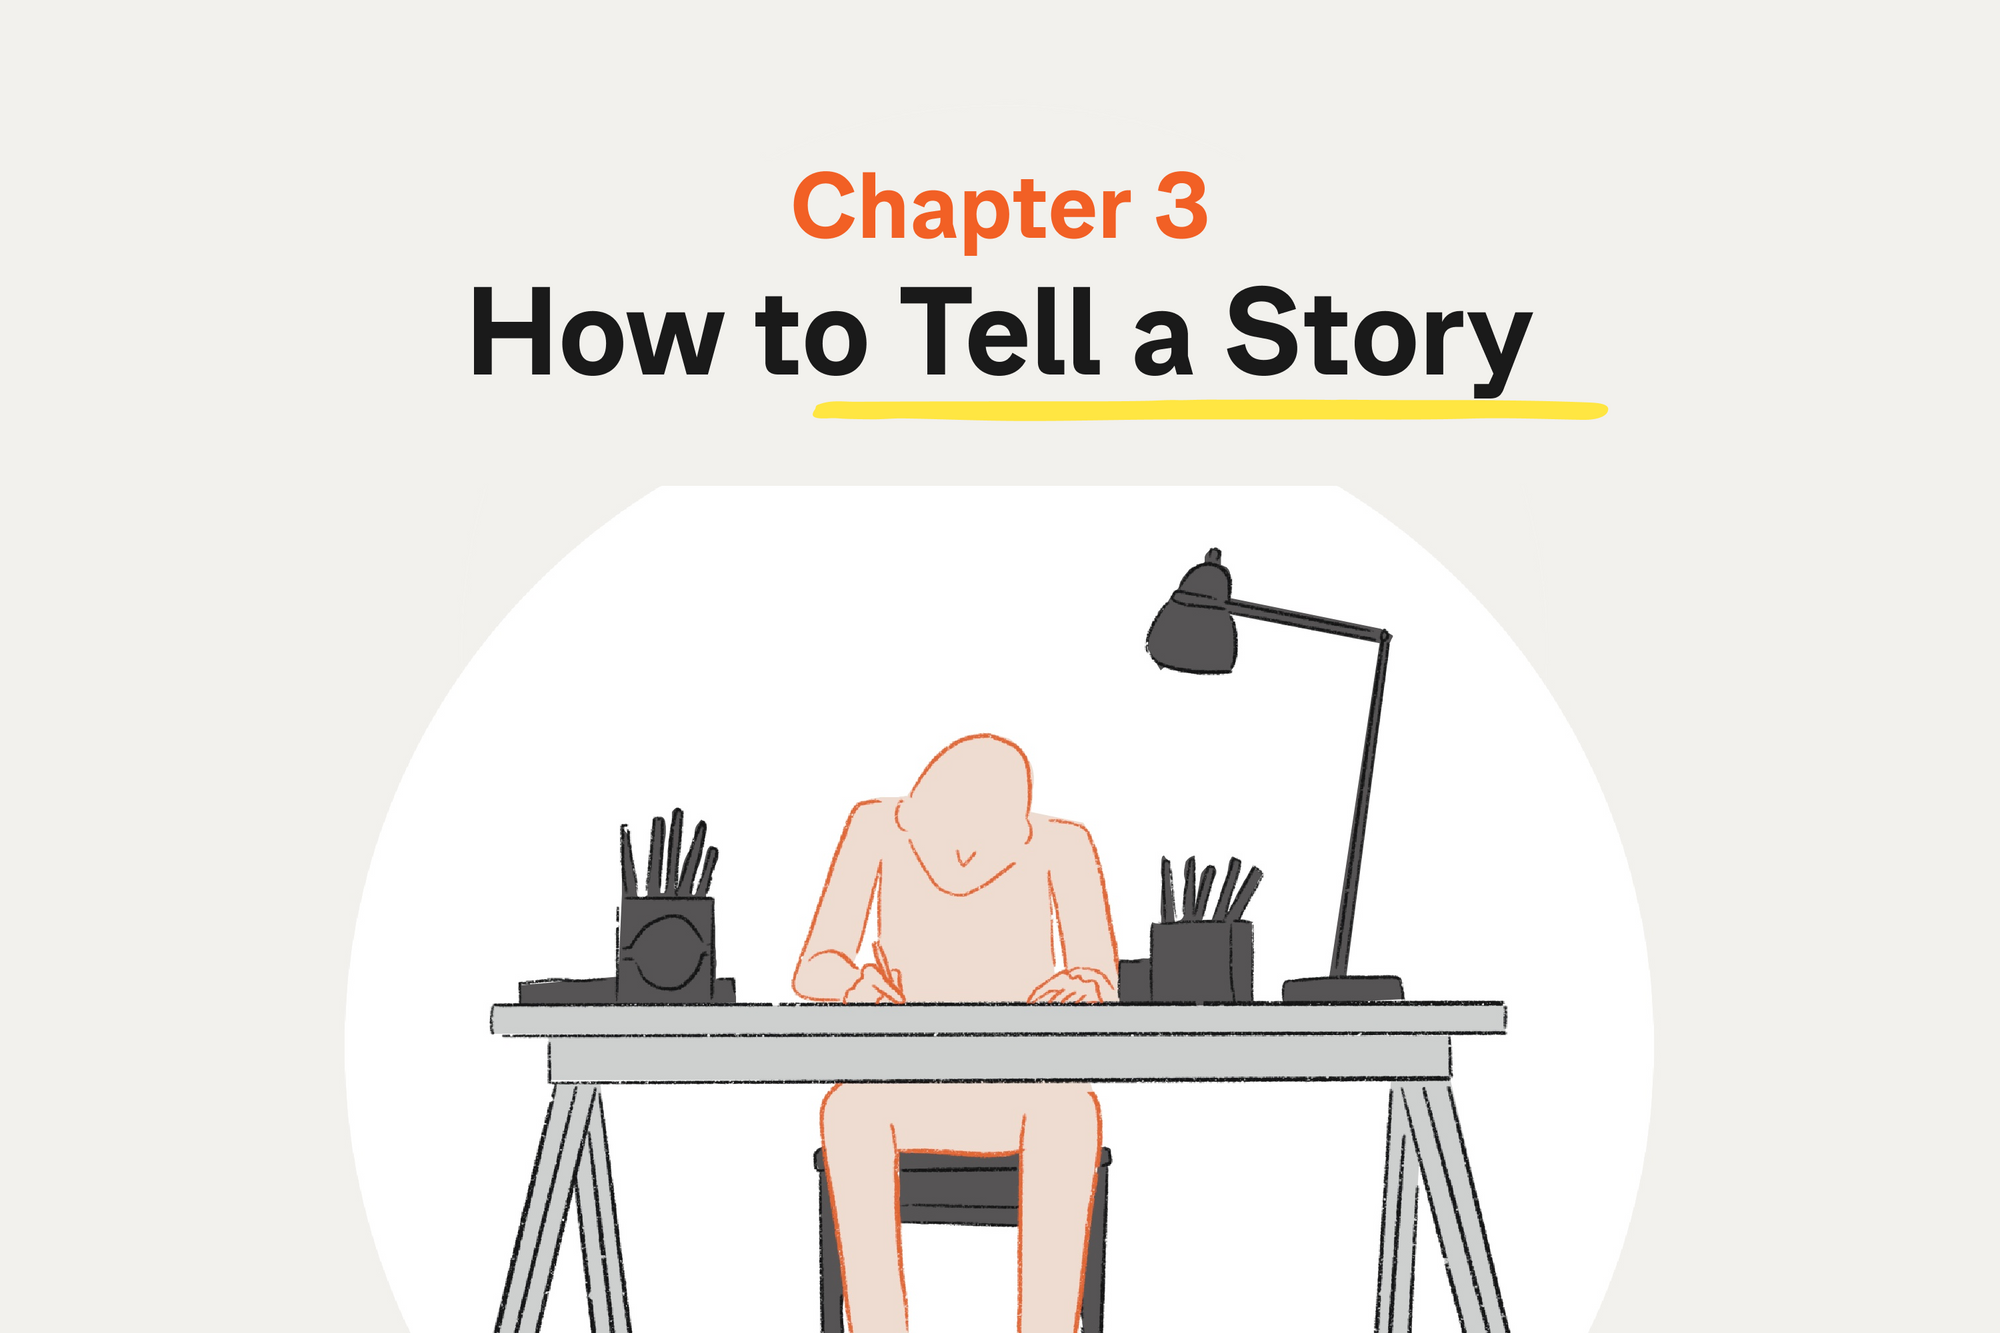 Chapter 3: How to tell a story